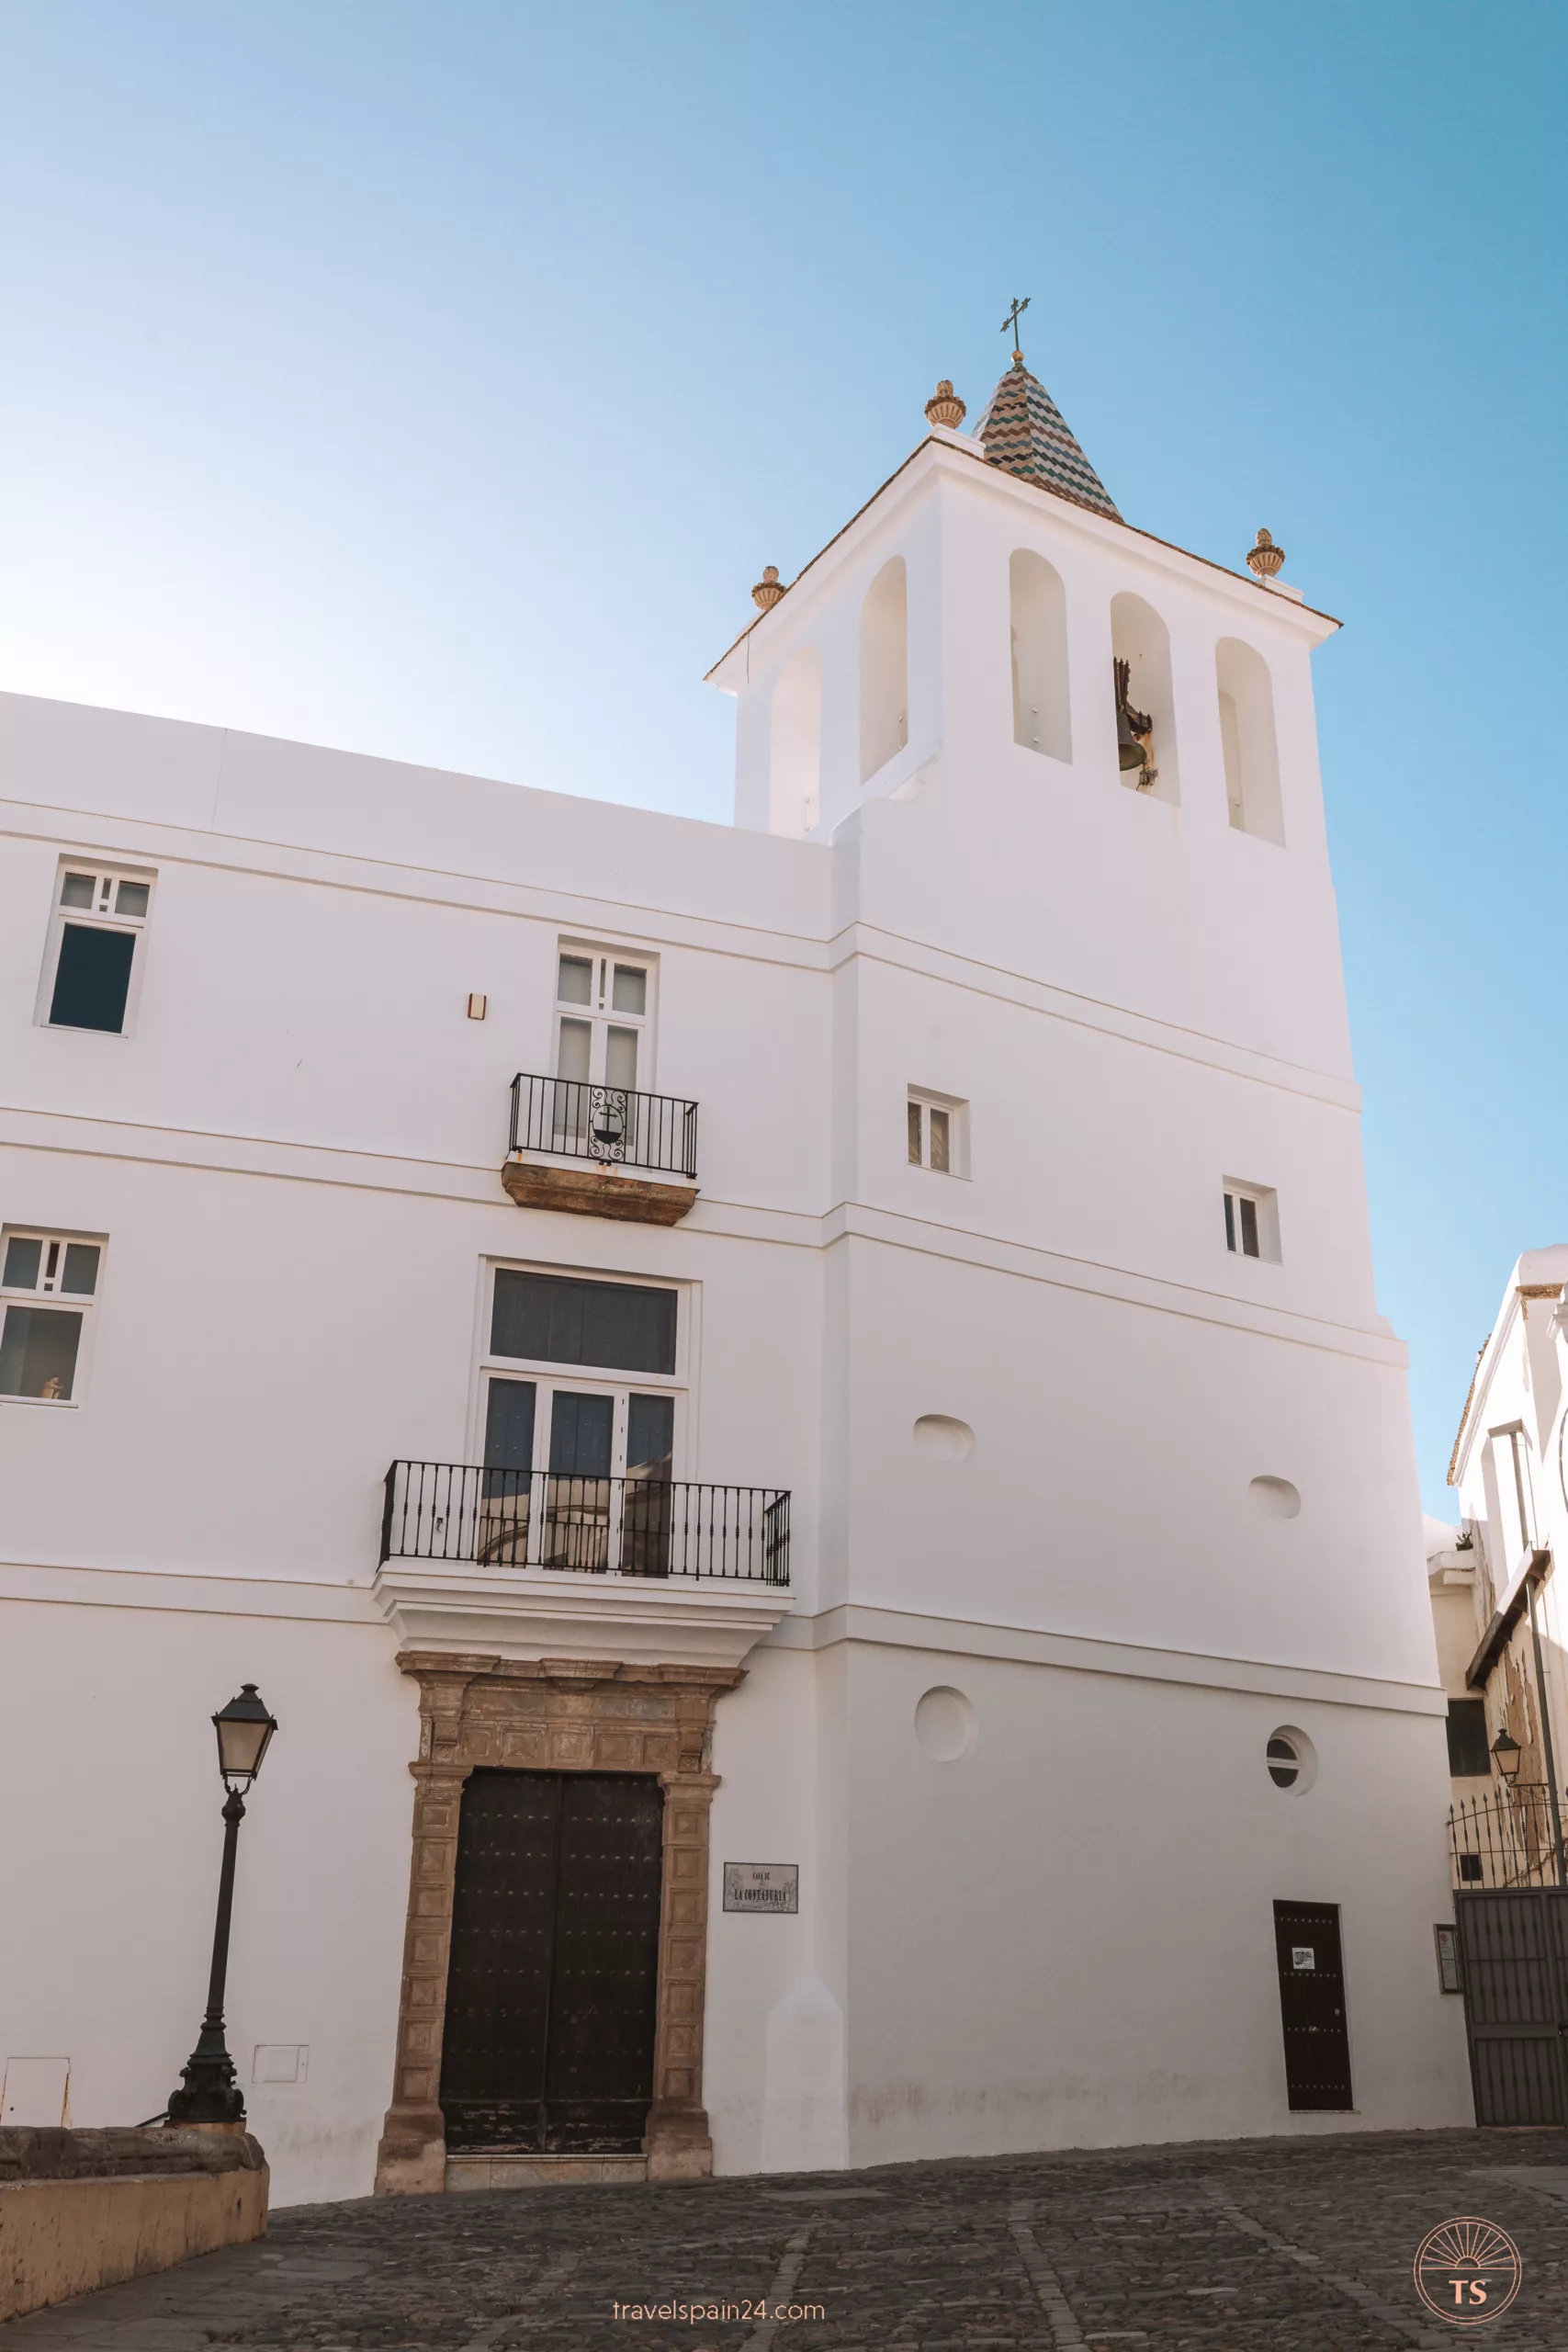 Casa de la Contaduría in Cadiz, with a striking contrast of the white building against the blue sky. This site is one of the Cadiz highlights, emphasizing the city's beautiful and historic architecture.